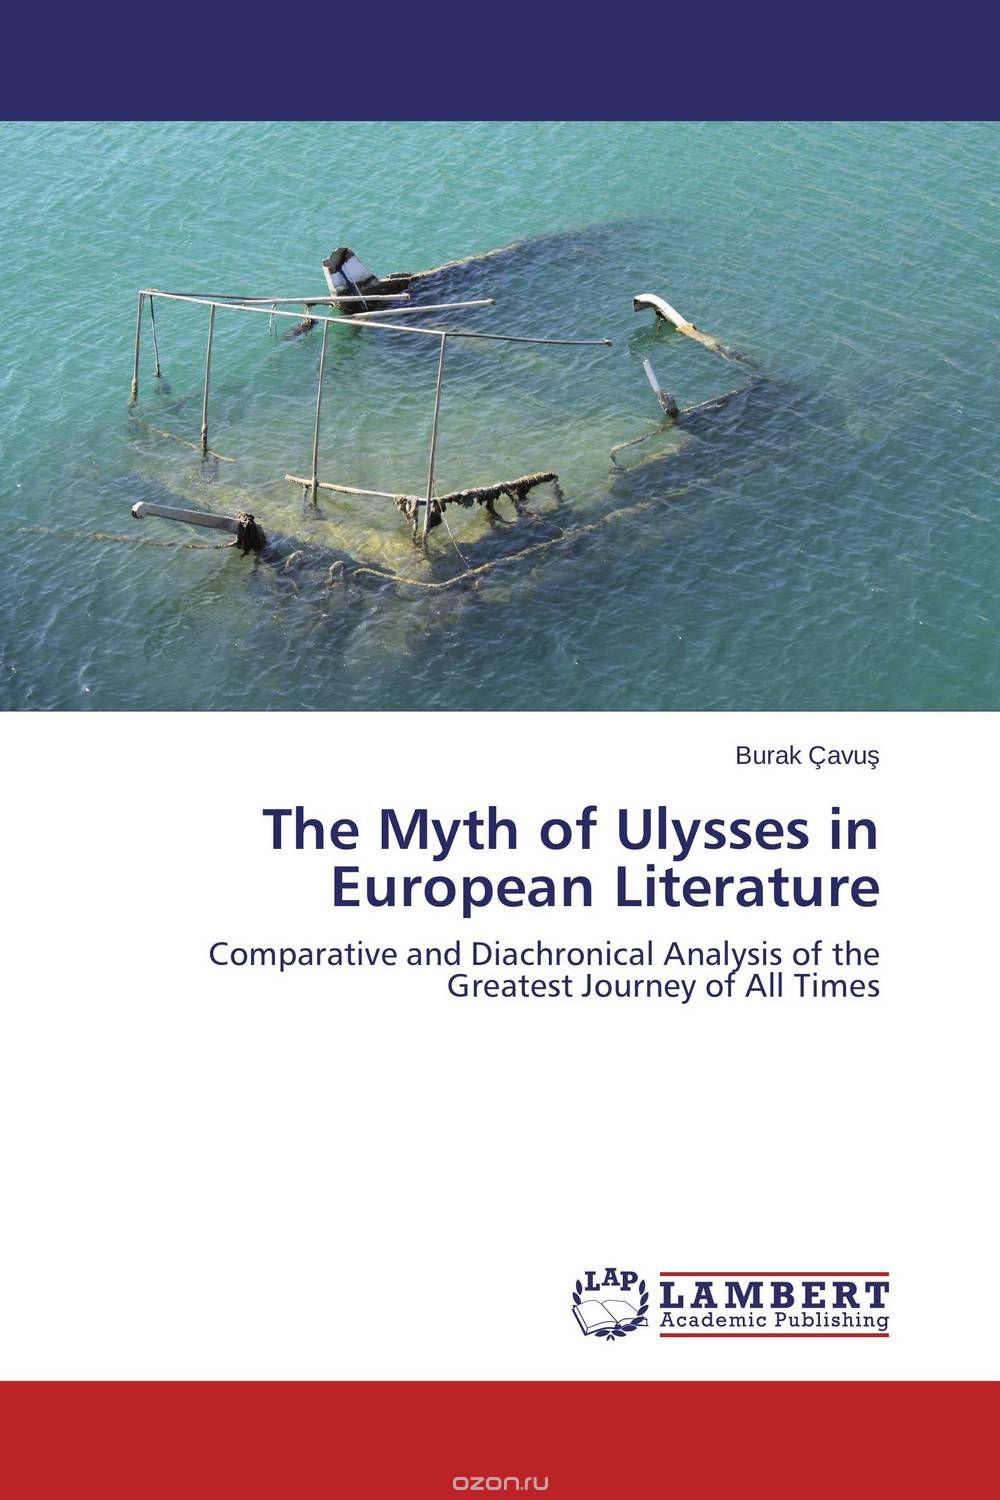 The Myth of Ulysses in European Literature